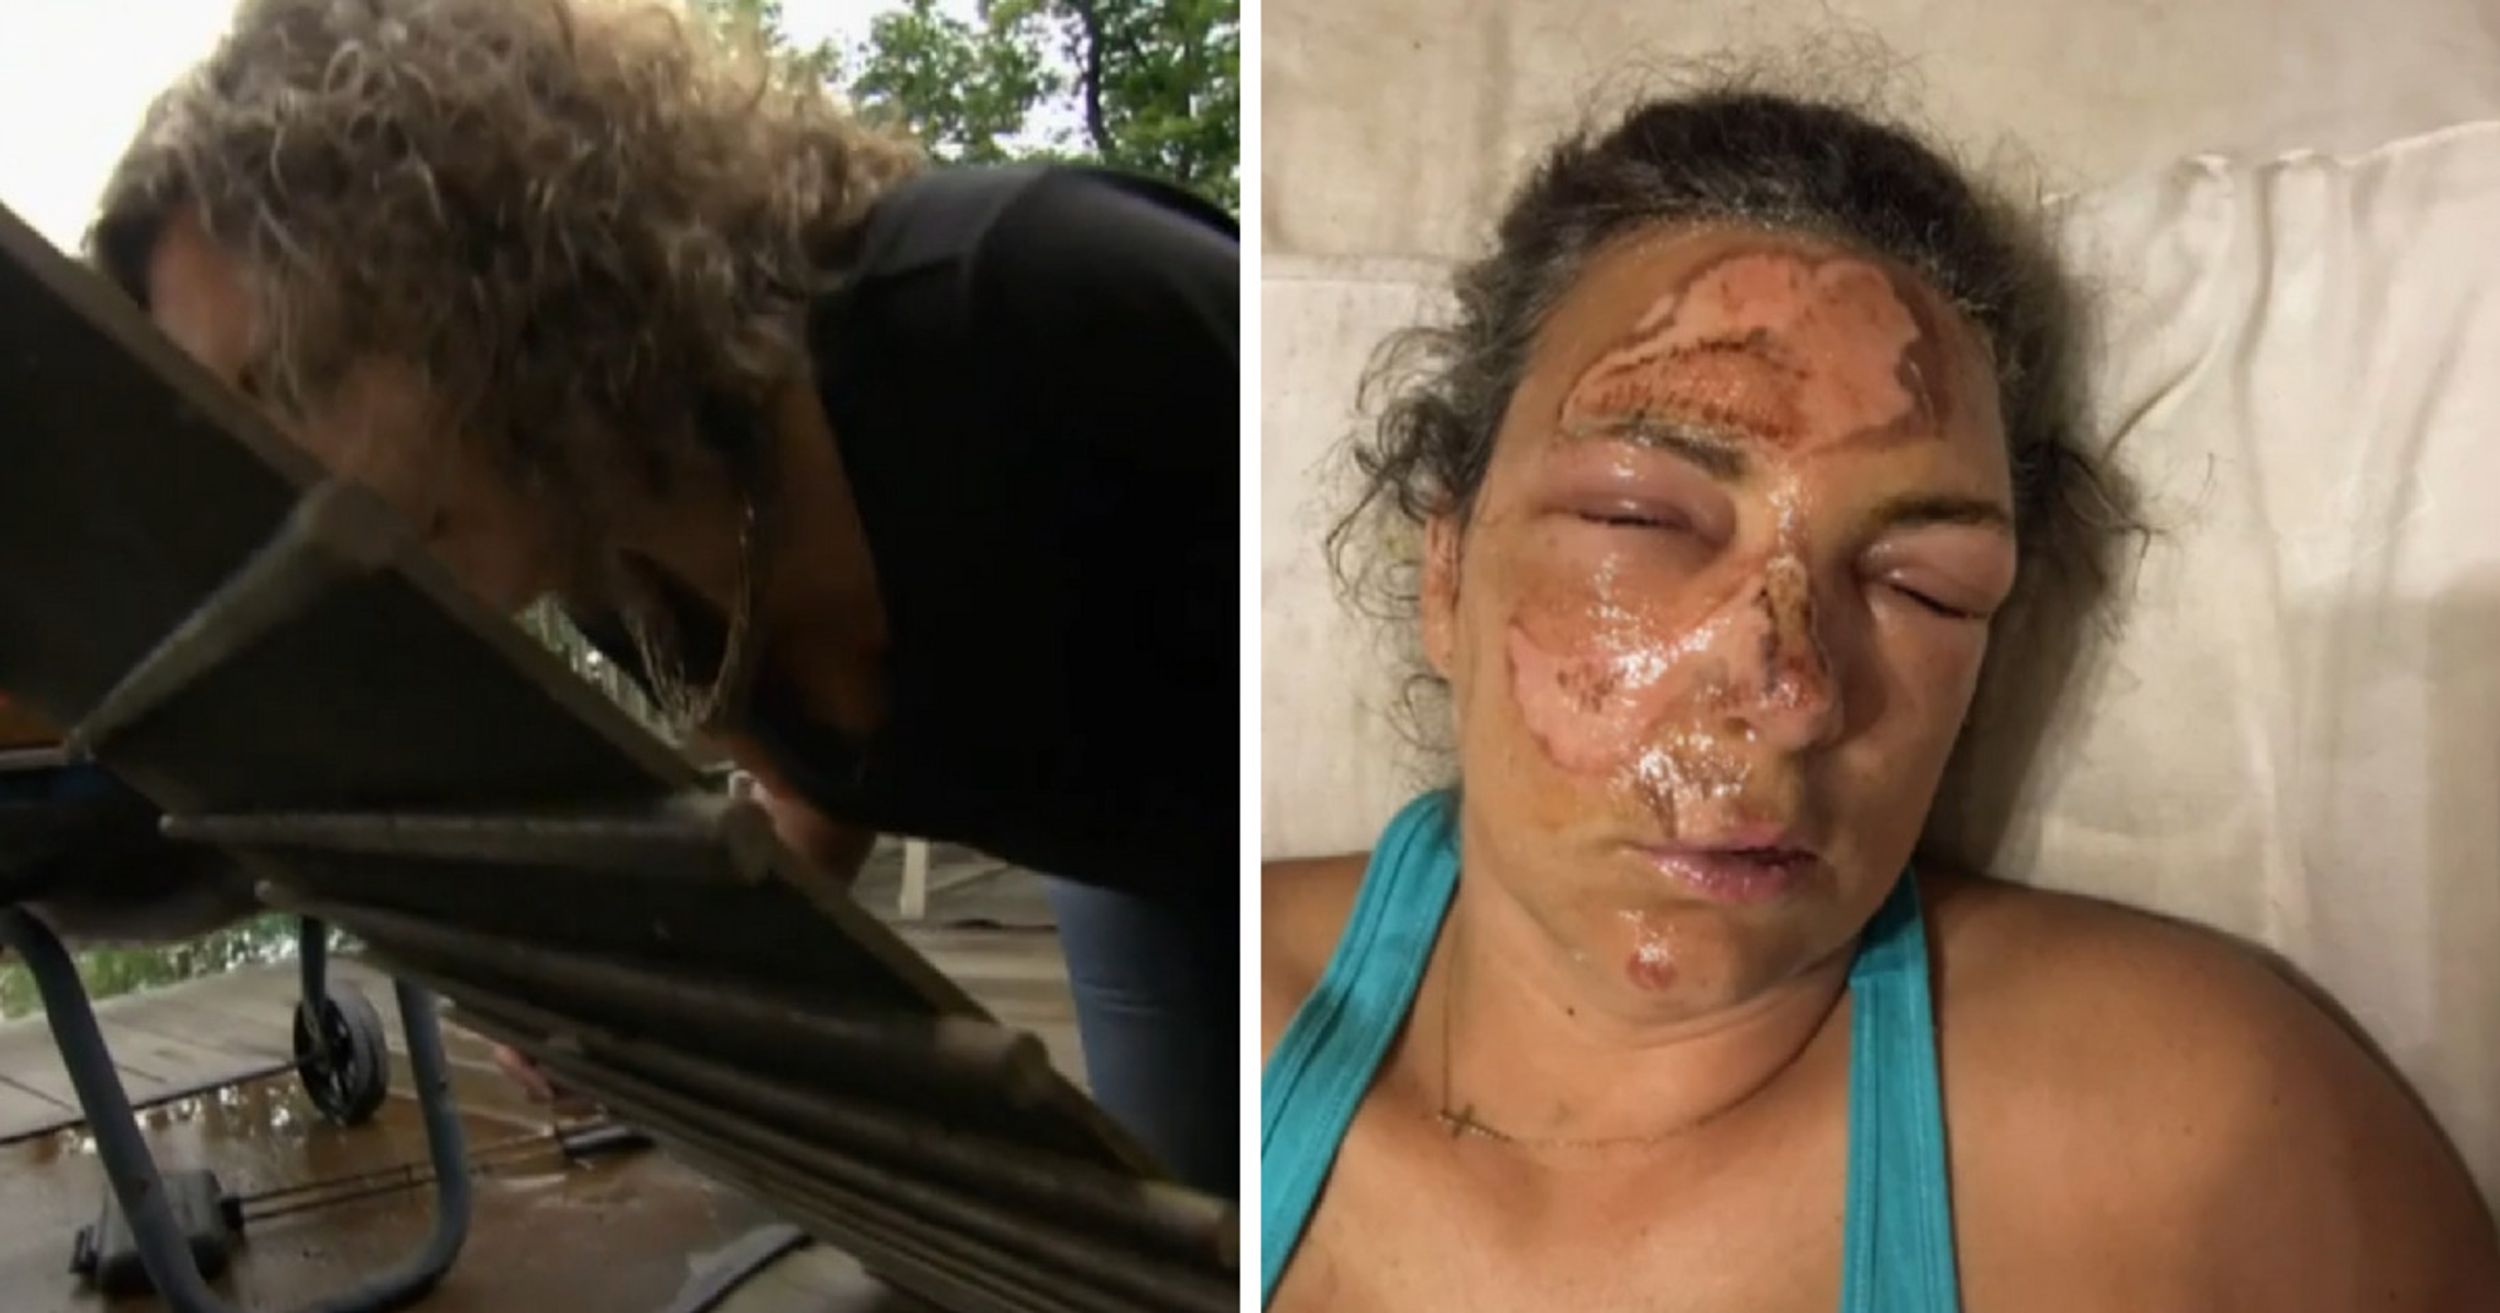 Husband's Quick Thinking Saved Wife's Face After She Fell Onto Hot Grill